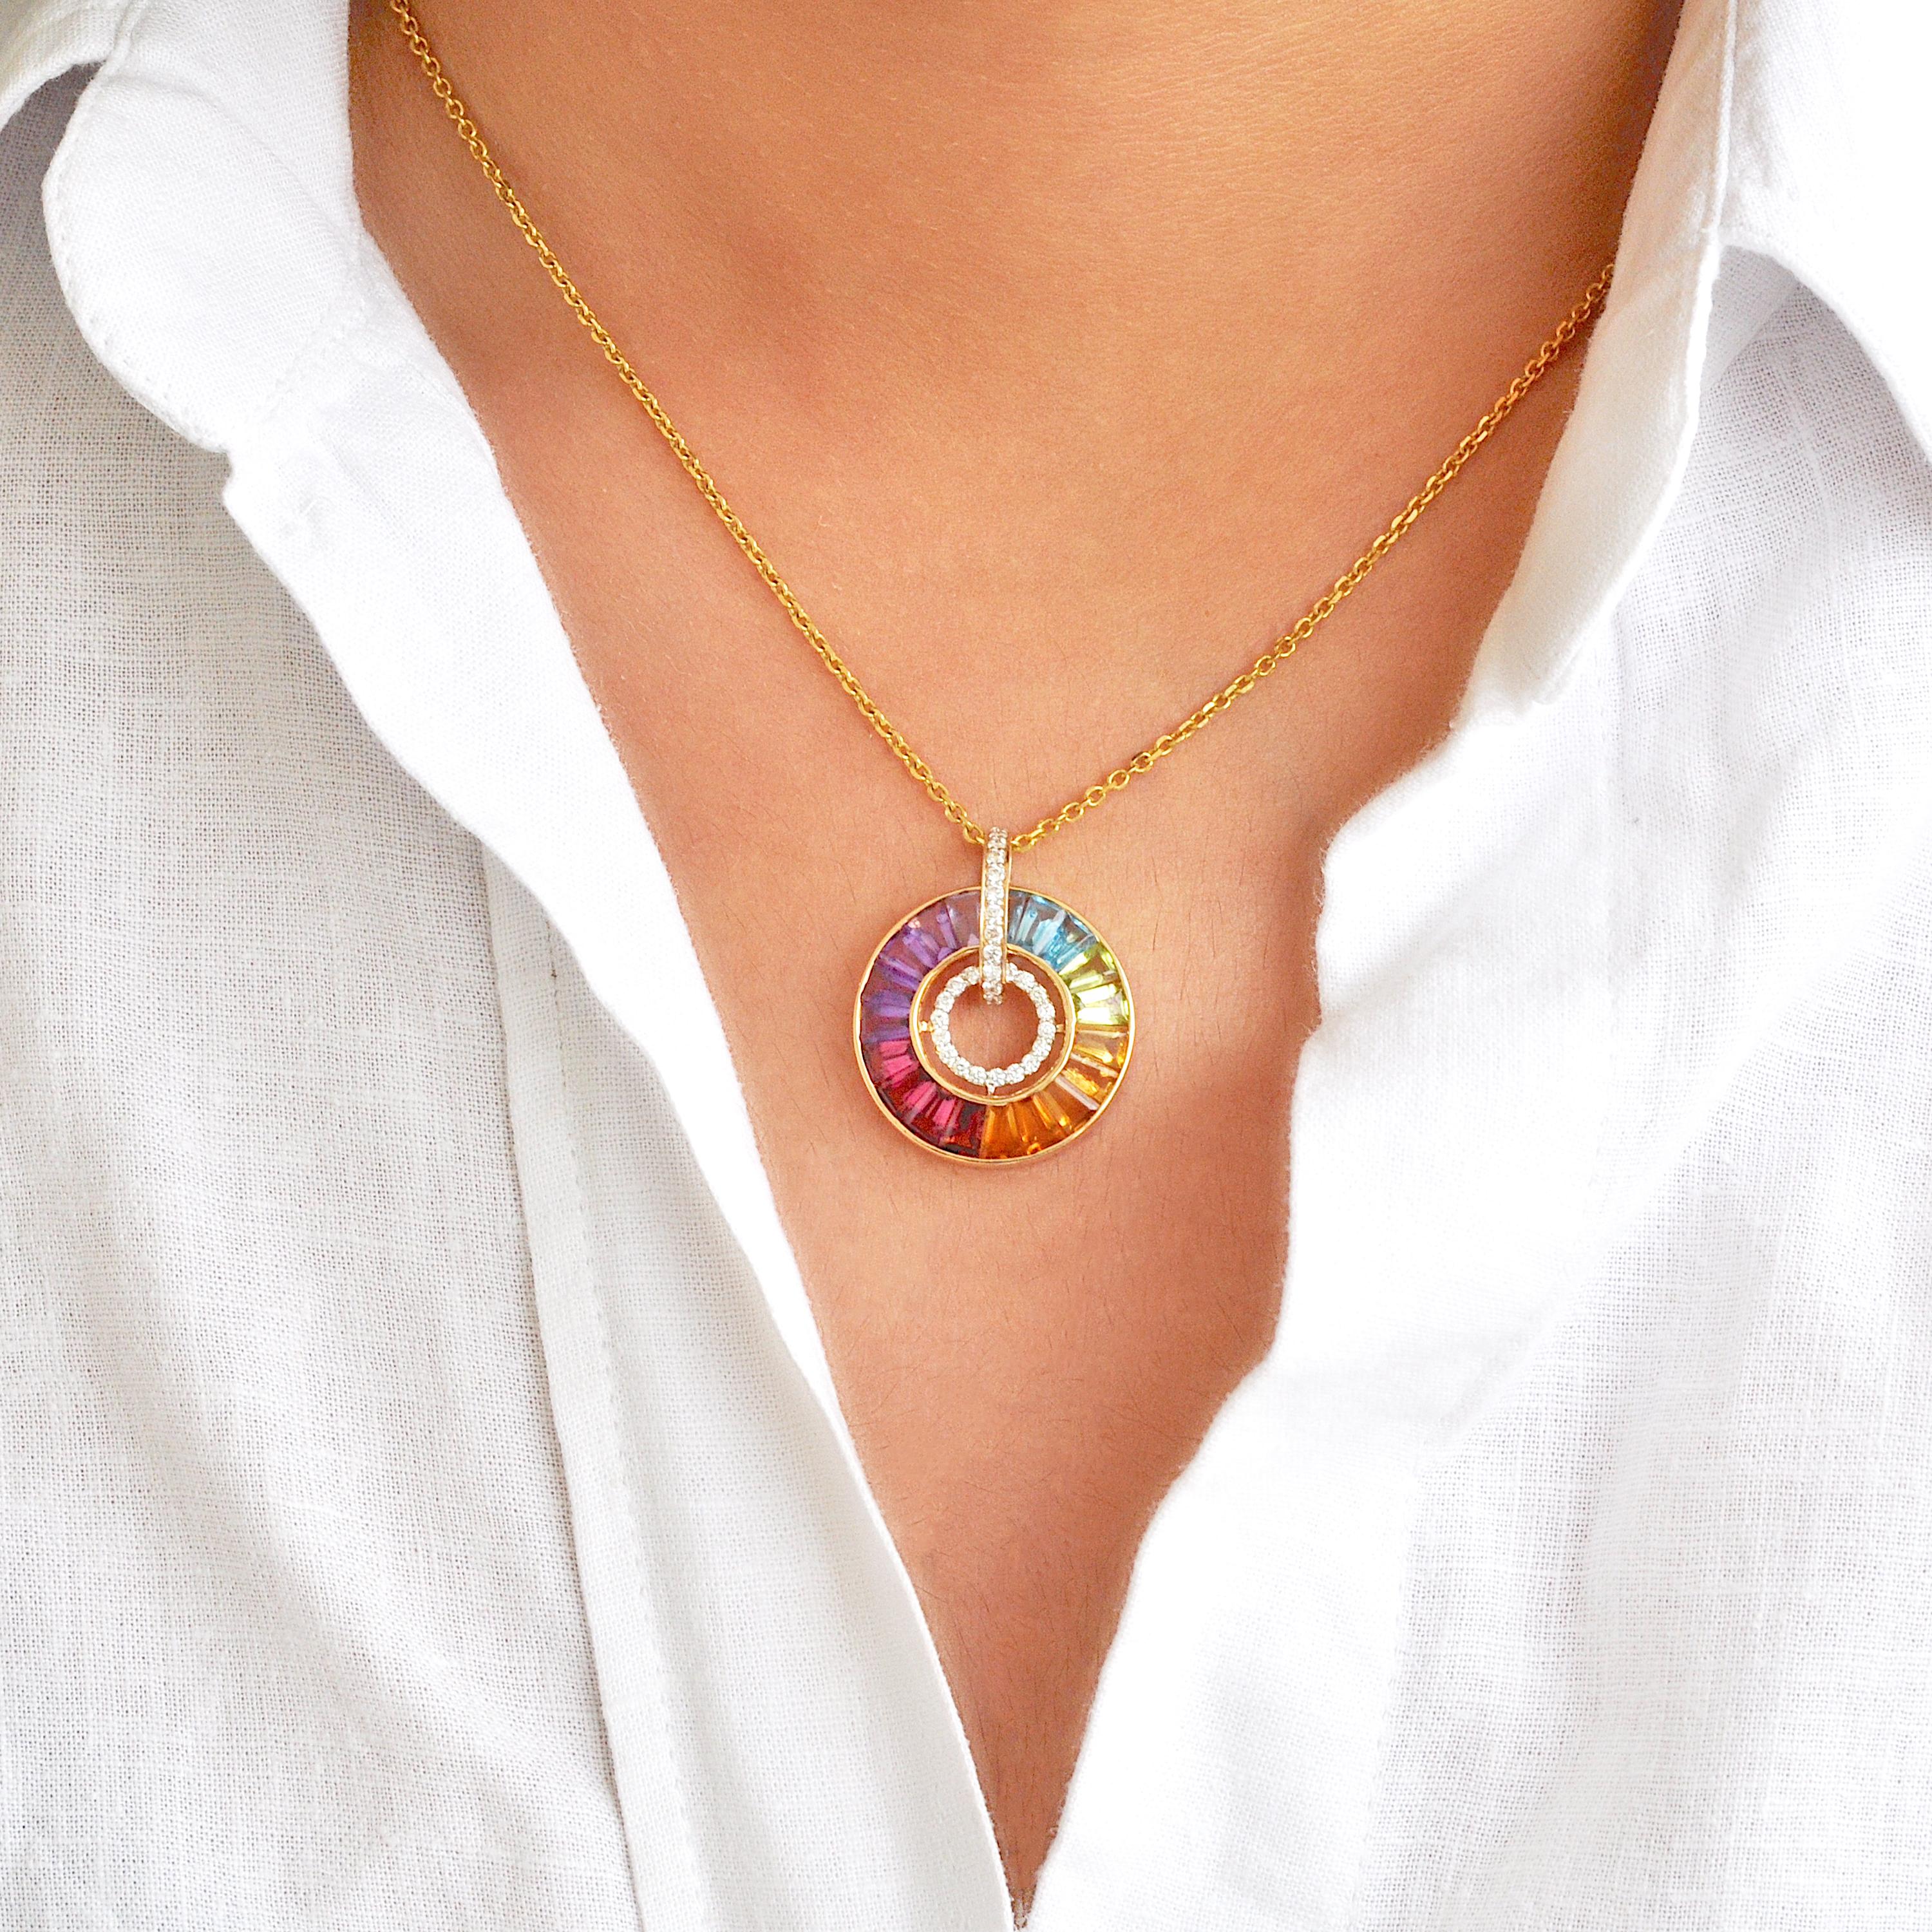 18 karat gold channel set rainbow multicolor gemstones diamond art deco circular pendant.

A brilliant showcase of style awaits with our Rainbow Circle Diamond Pendant. This masterpiece is carefully crafted, featuring specially tapered baguette-cut